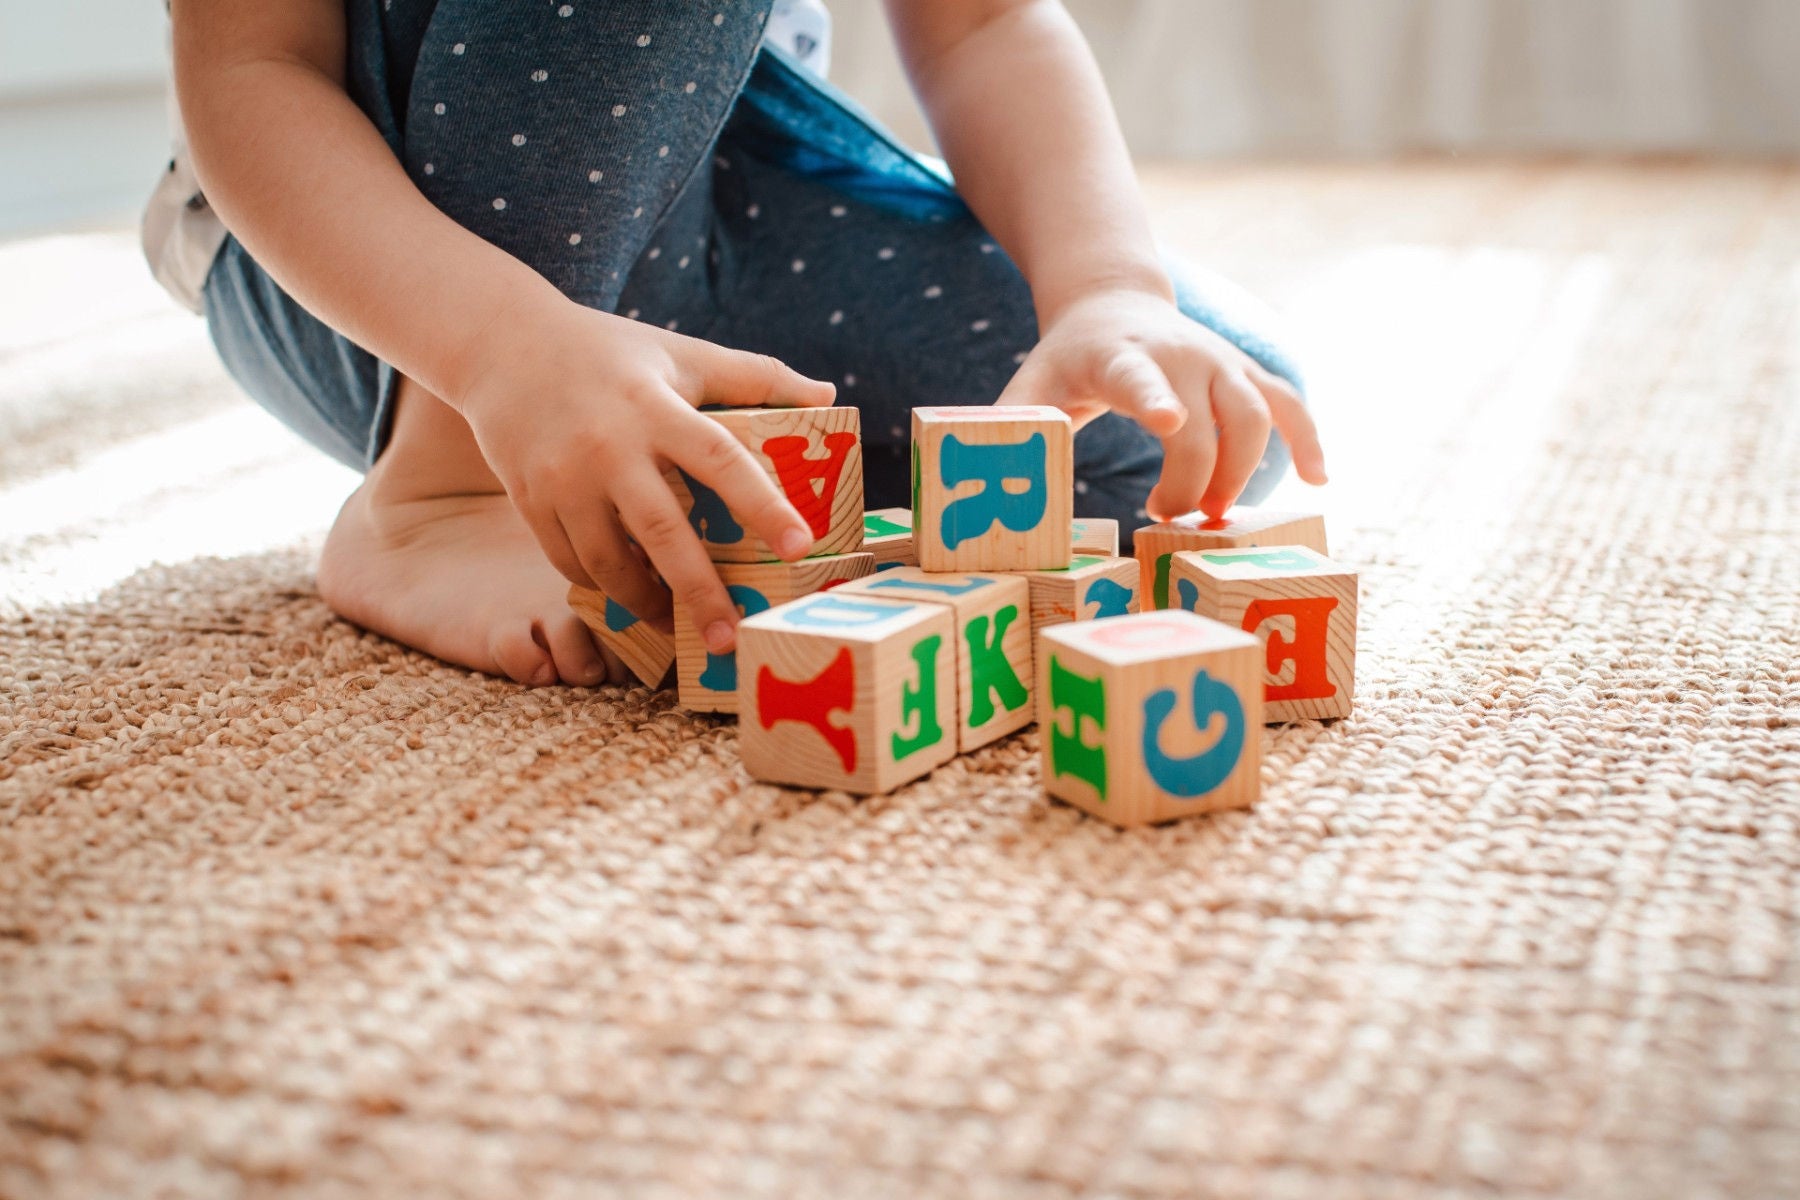 Child plays with wooden blocks with letters on the floor in the room